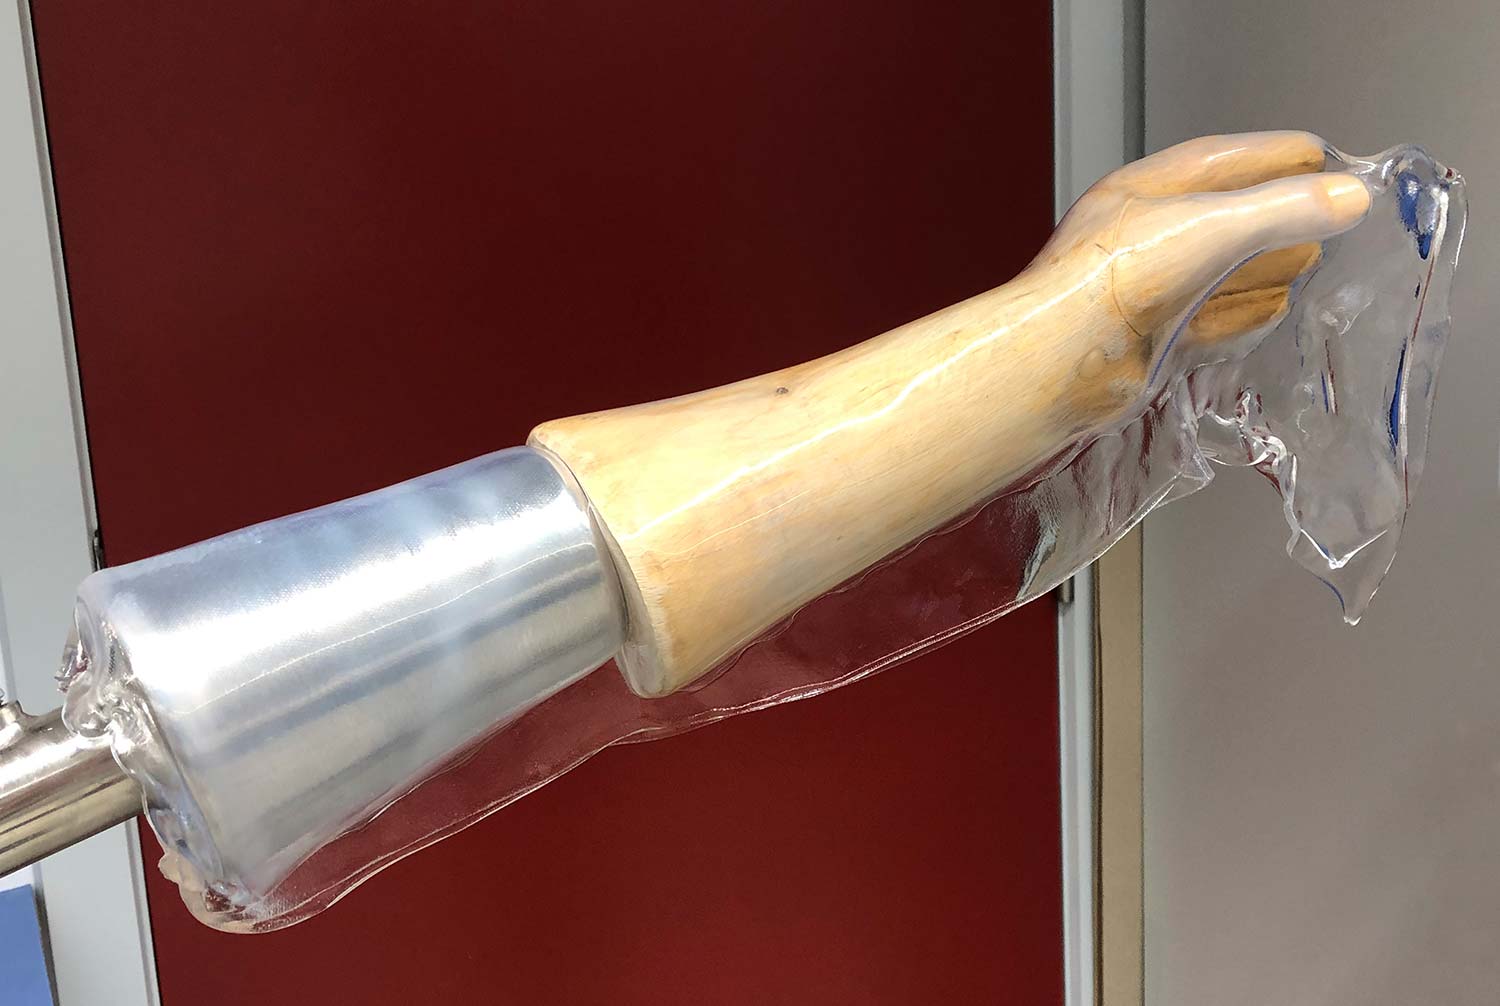 Drape-forming a high-temperature orthosis on a wooden model of a hand